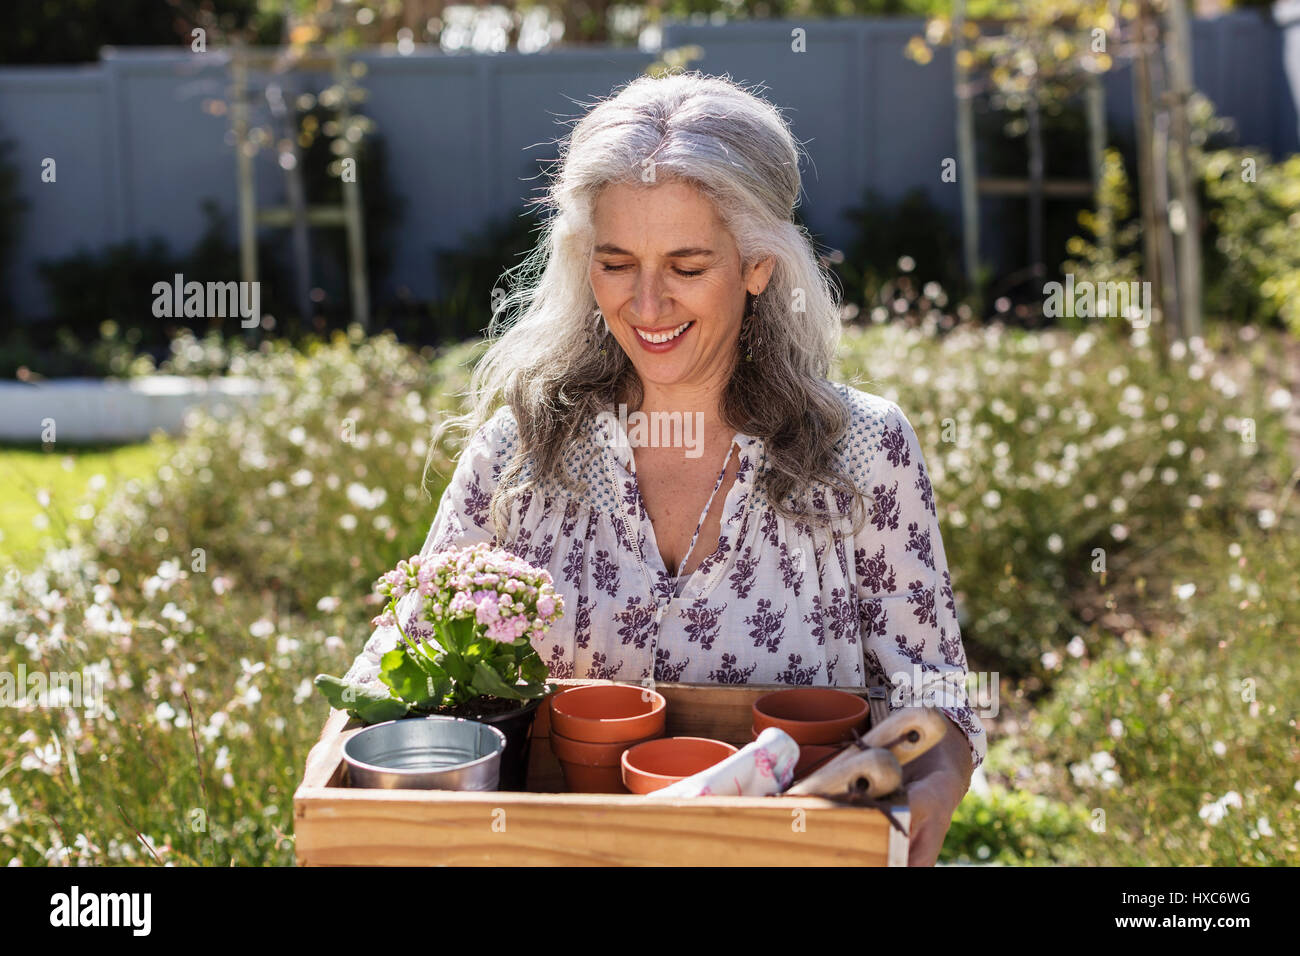 Smiling mature woman carrying gardening tray in sunny garden Stock Photo